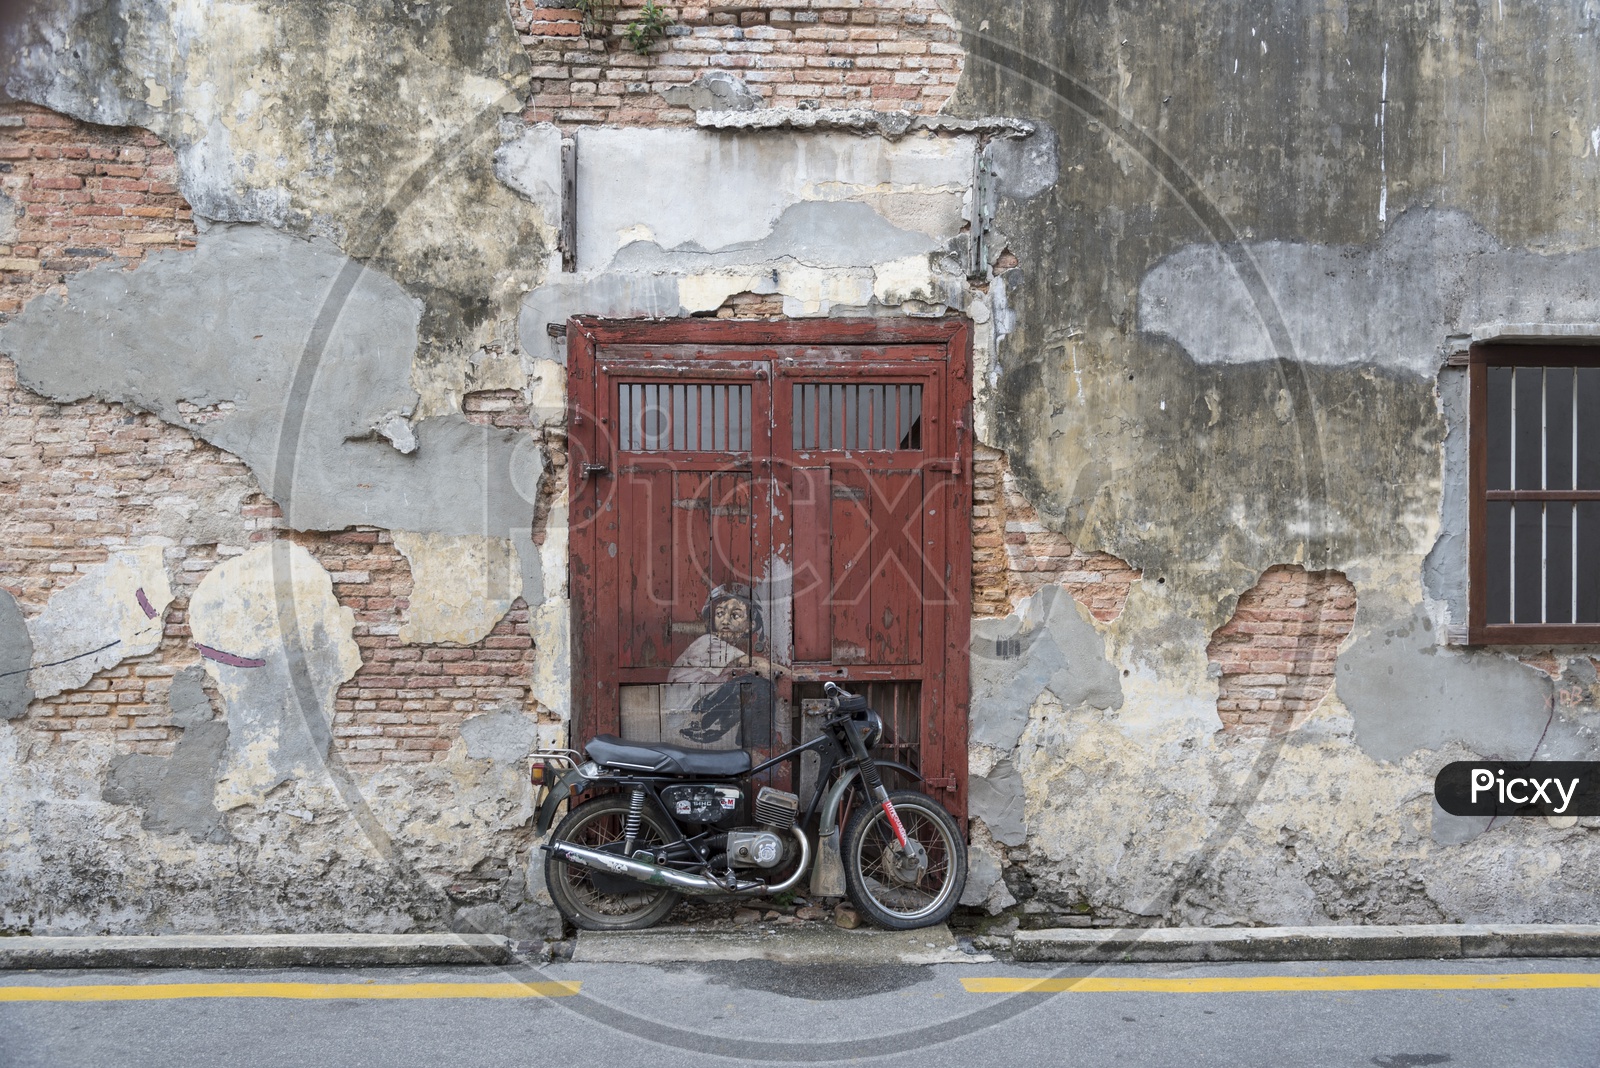 "Little Boy With Pet Dinosaur" street art on wall by Lithuanian artist Ernest Zacharevic in George Town, Penang, Malaysia.